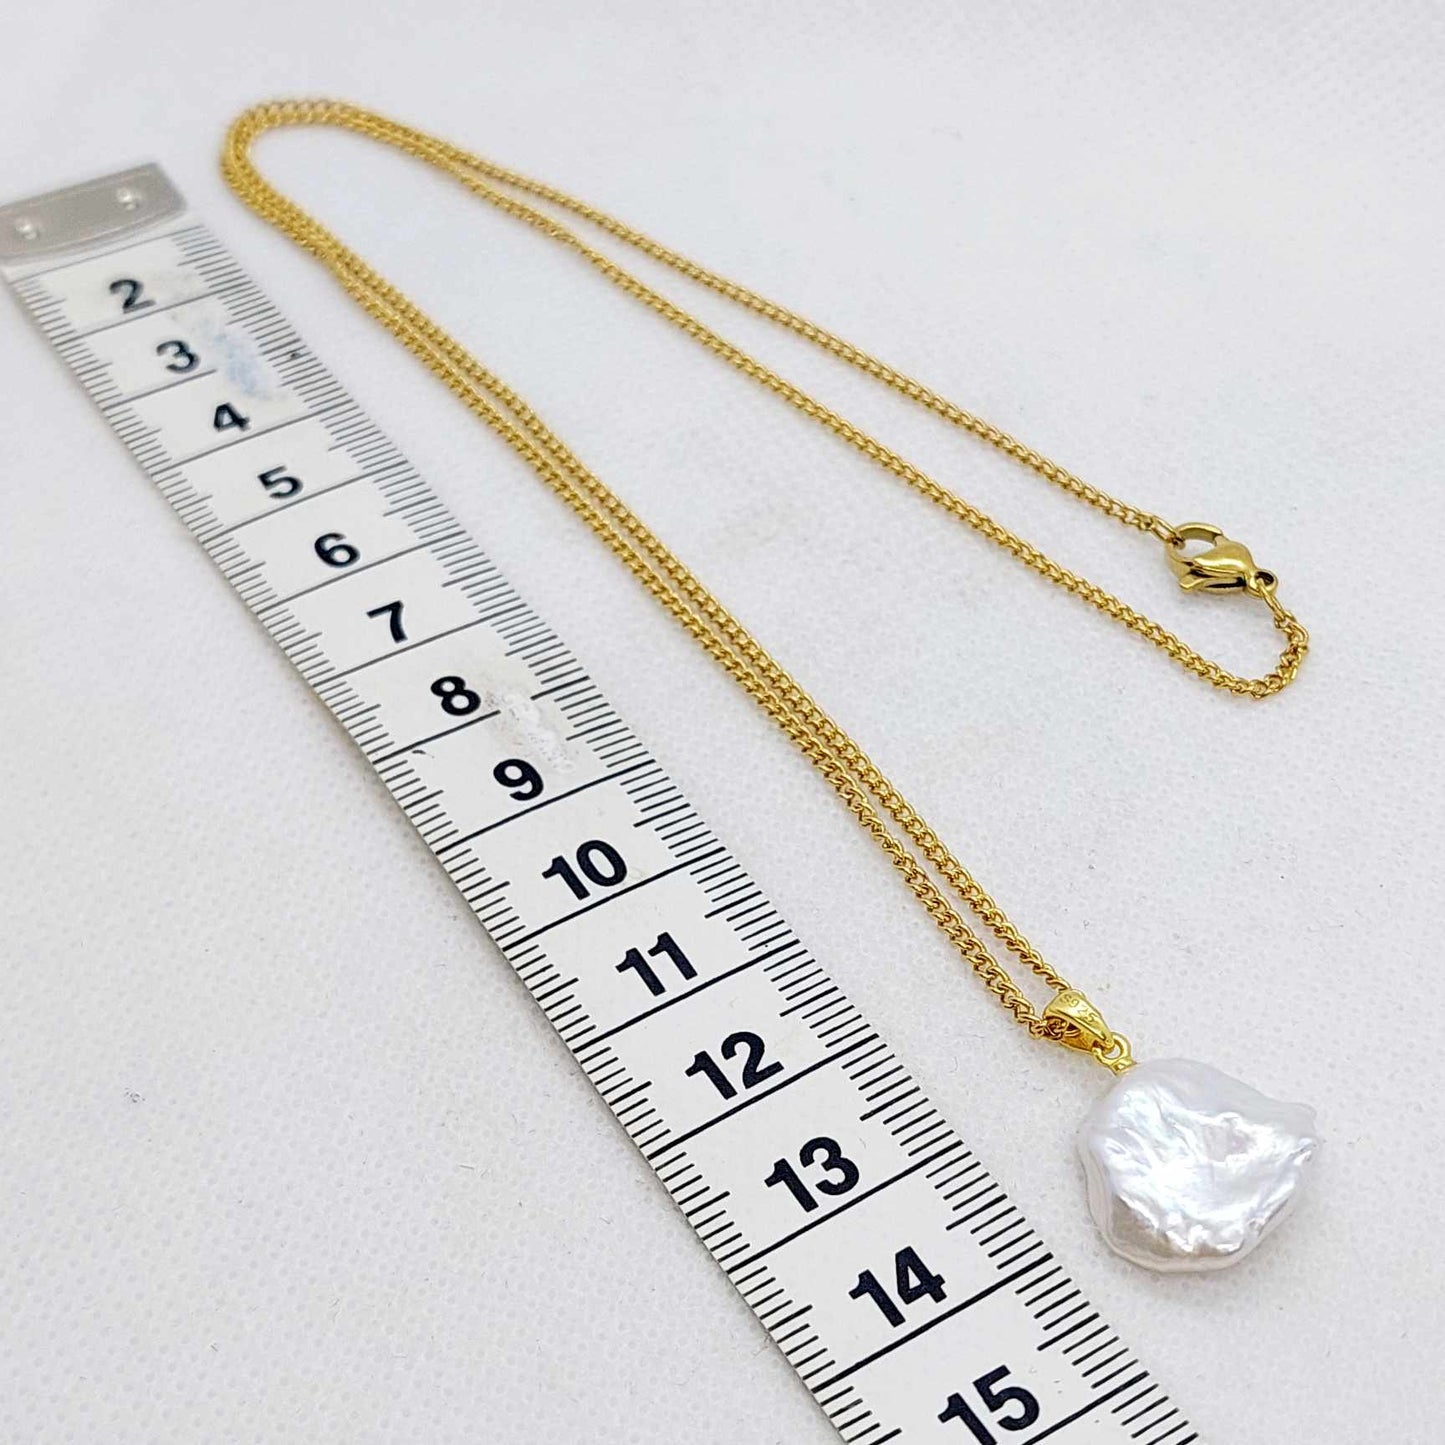 Natural Fresh Water Irregular Baroque Pearl Pendant with Gold Plated Stainless Steel Chain Necklace